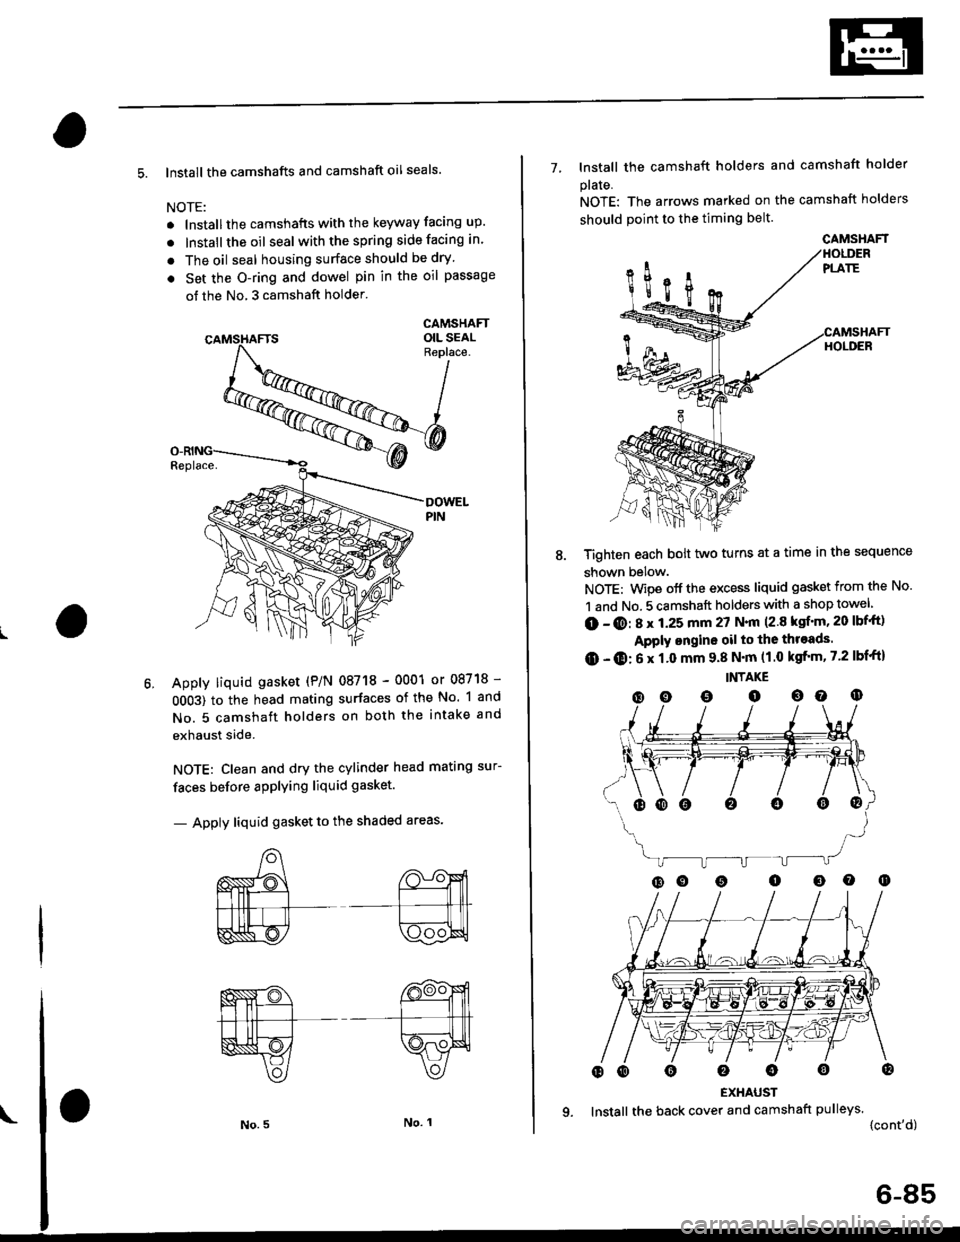 HONDA CIVIC 1999 6.G User Guide 5. lnstall the camshafts and camshaft oil seals.
NOTE:
. lnstallthe camshafts with the keyway facing up.
. lnstall the oil seal withthespring side facing in.
. The oil seal housing surface should be d